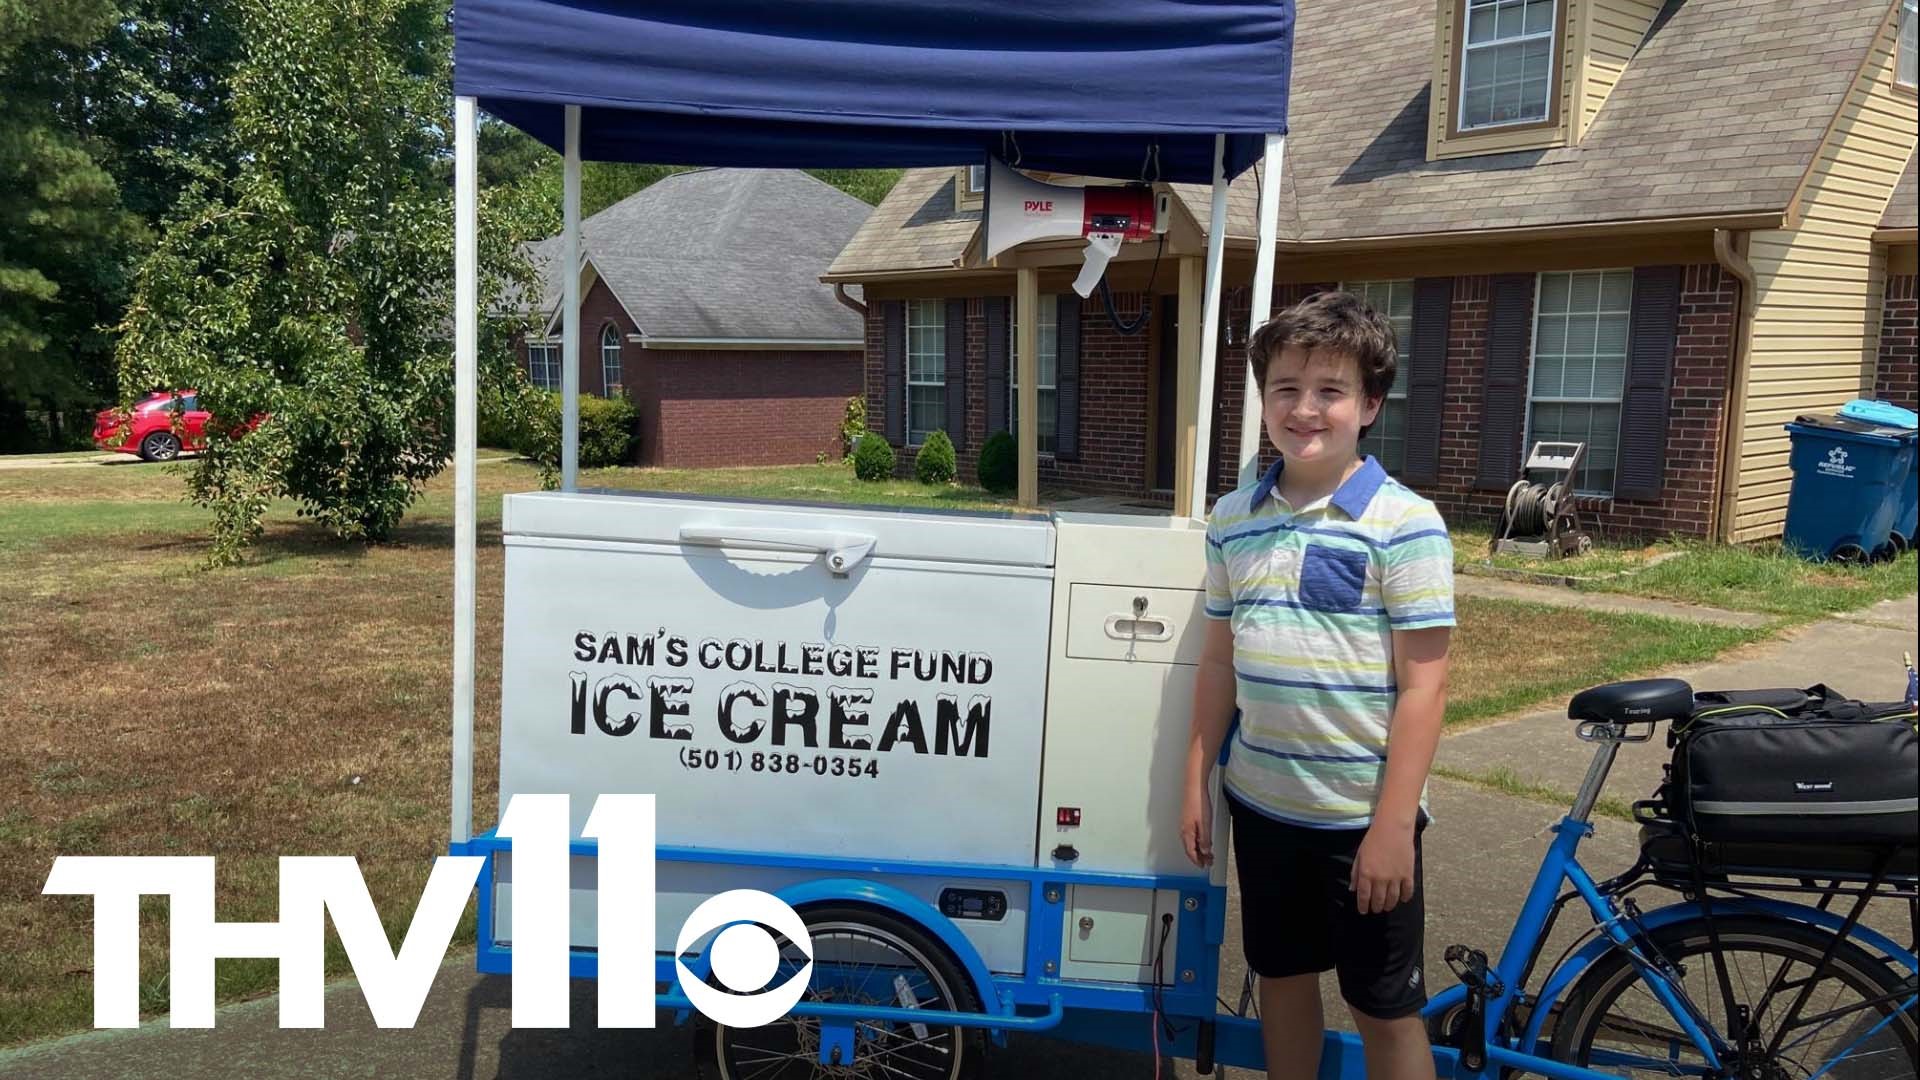 One young boy from Byant, Arkansas had a dream of starting his own business, and now he's living his dream through Sam's College Fund Ice Cream.